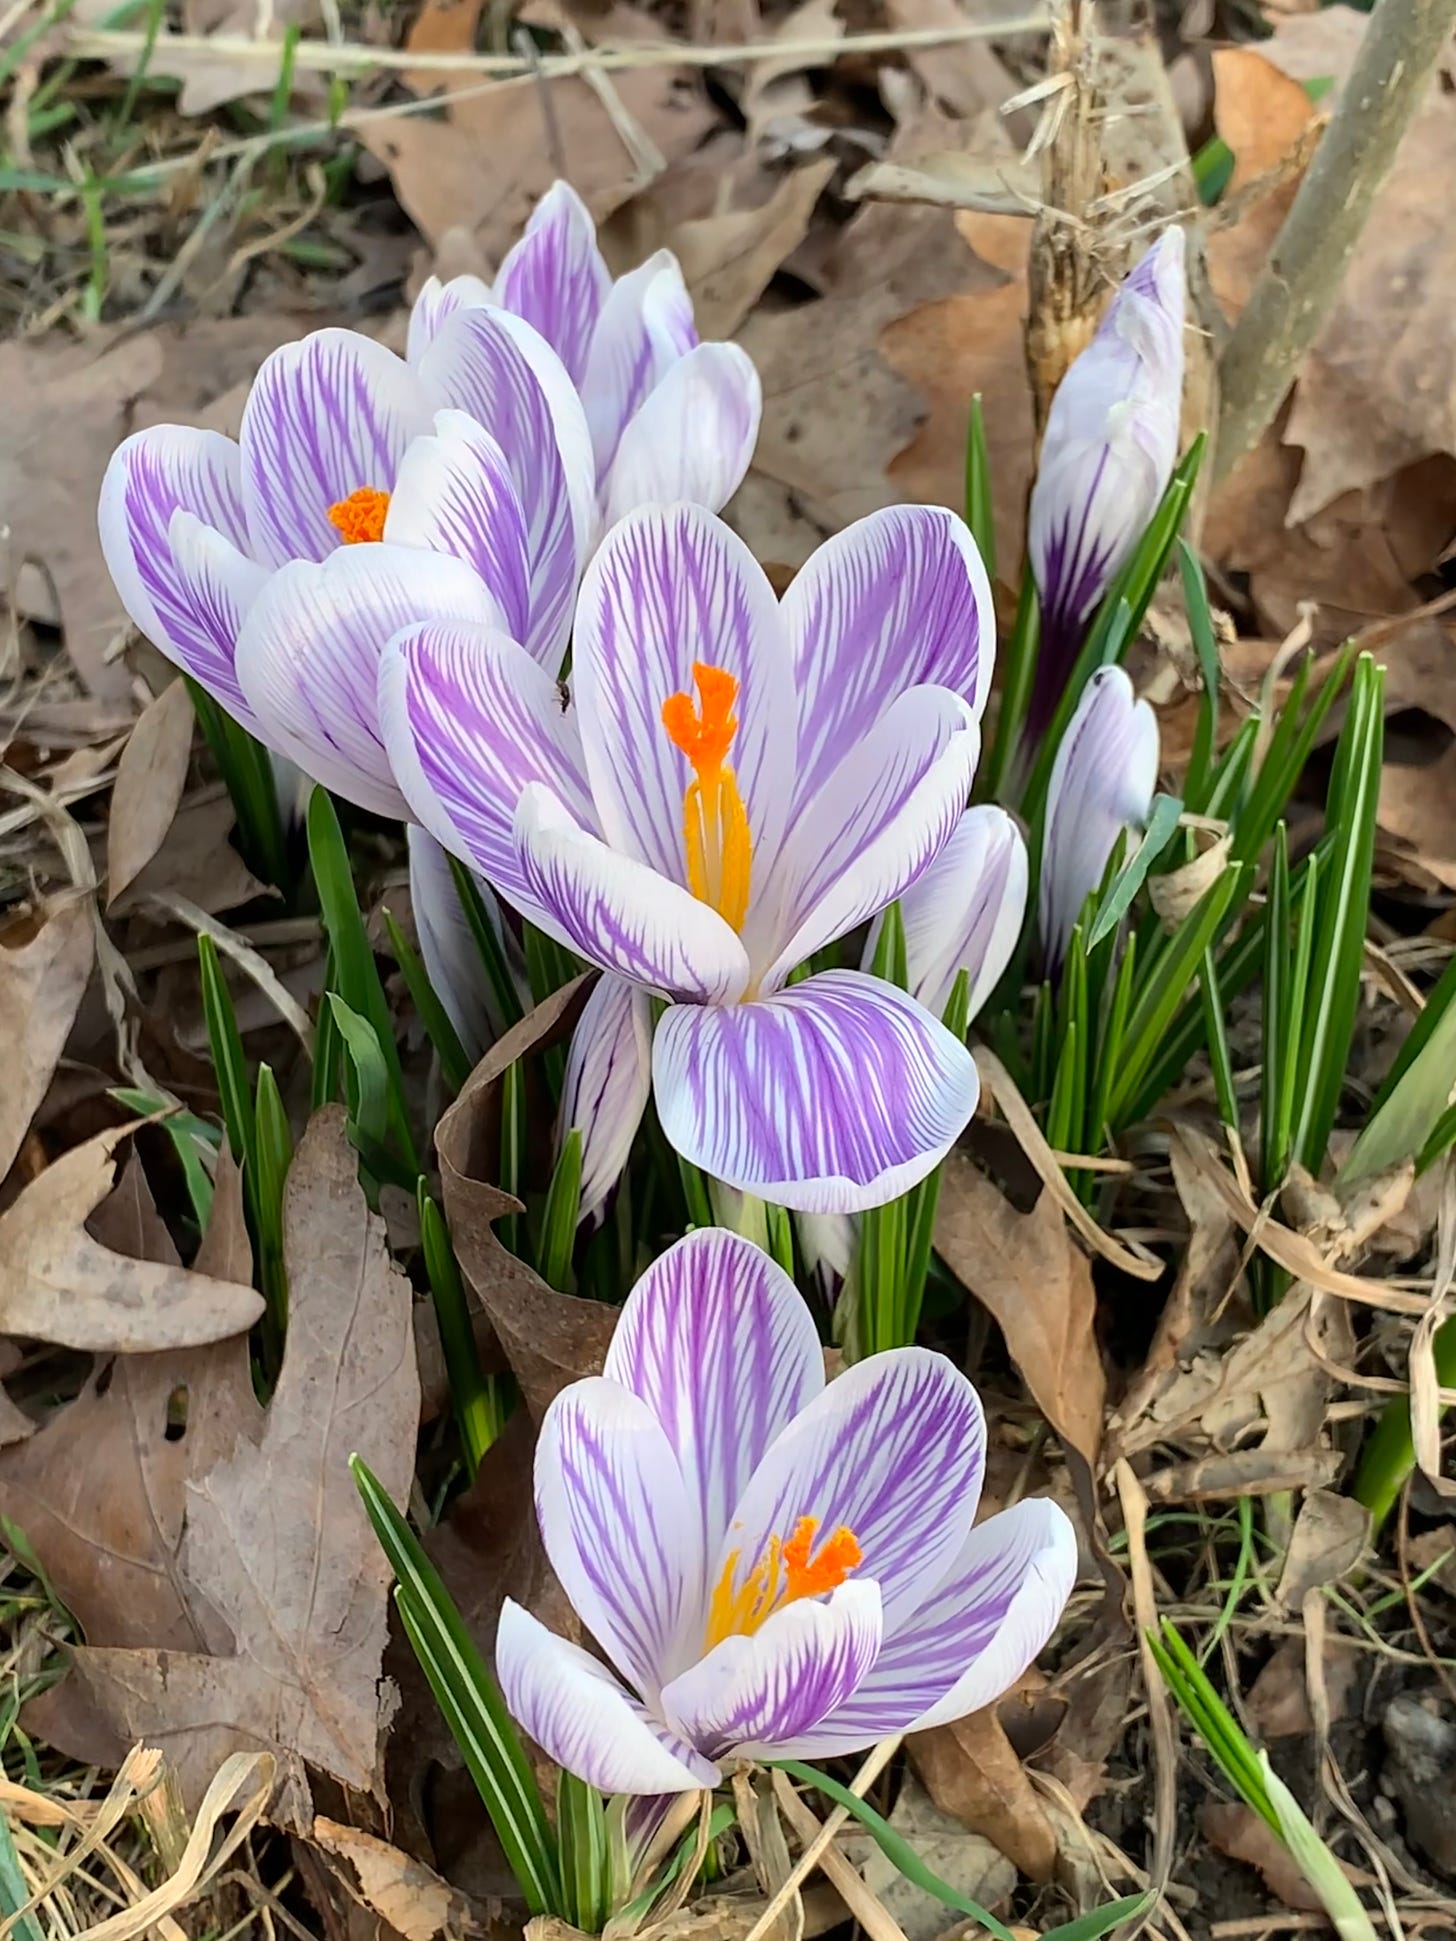 White flowers with purple lines with bright orange stamens